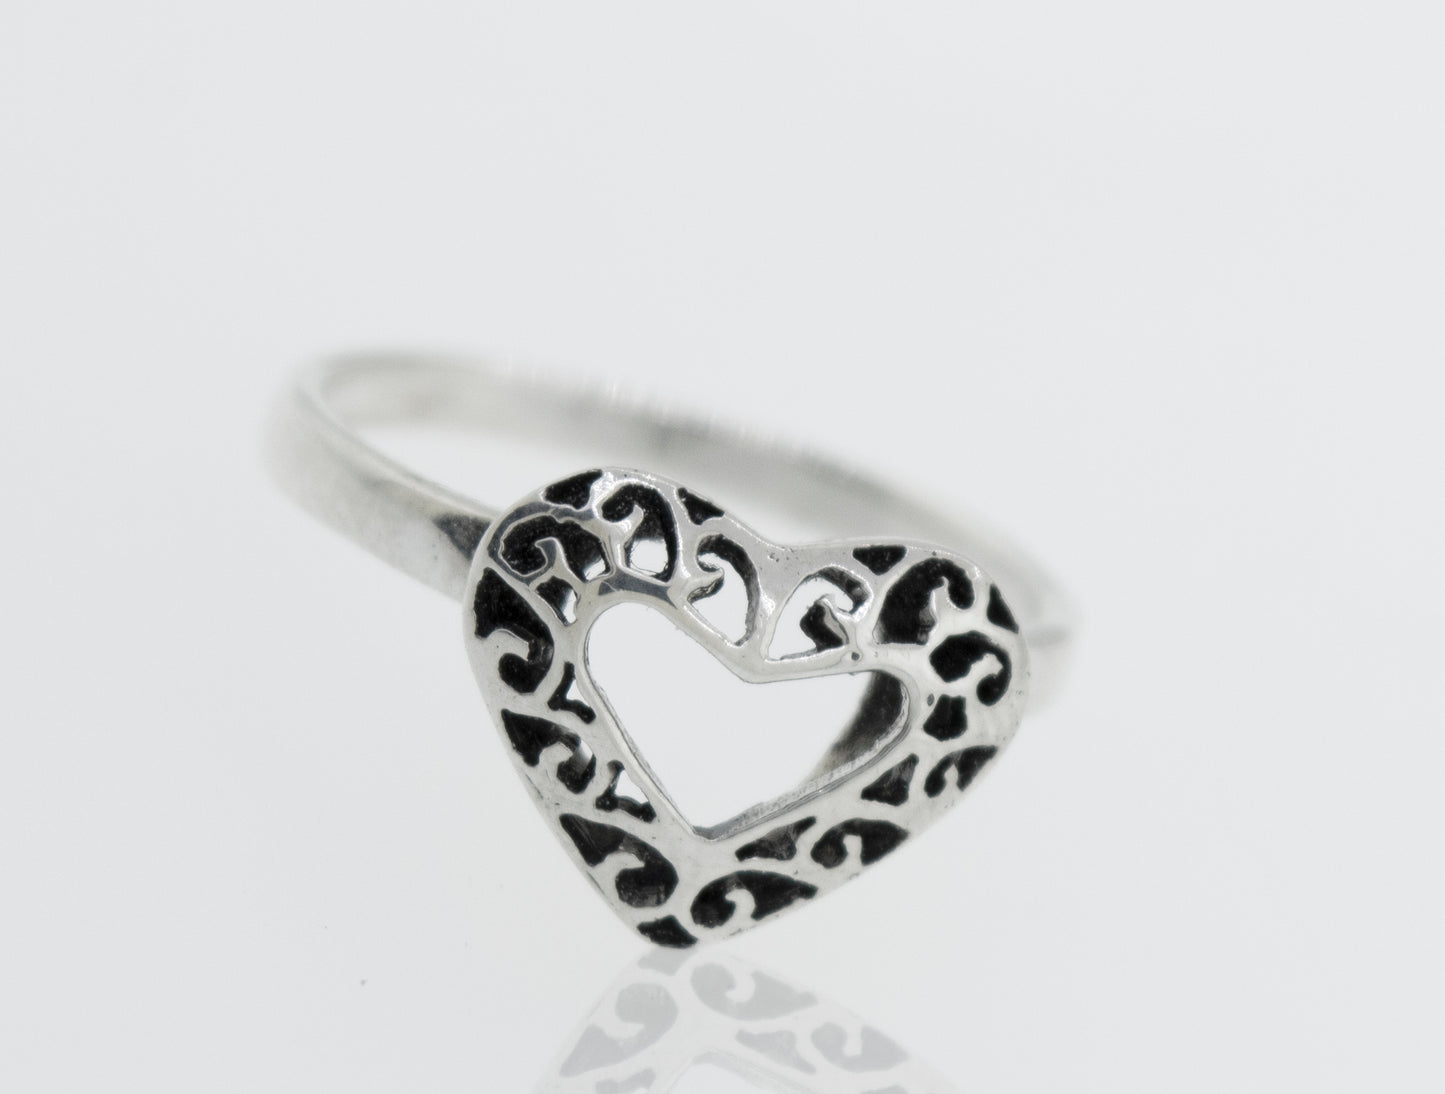 
                  
                    A minimalist Heart Shaped Ring with Filigree Detailing in the shape of a heart resting on a white surface, representing pure love.
                  
                